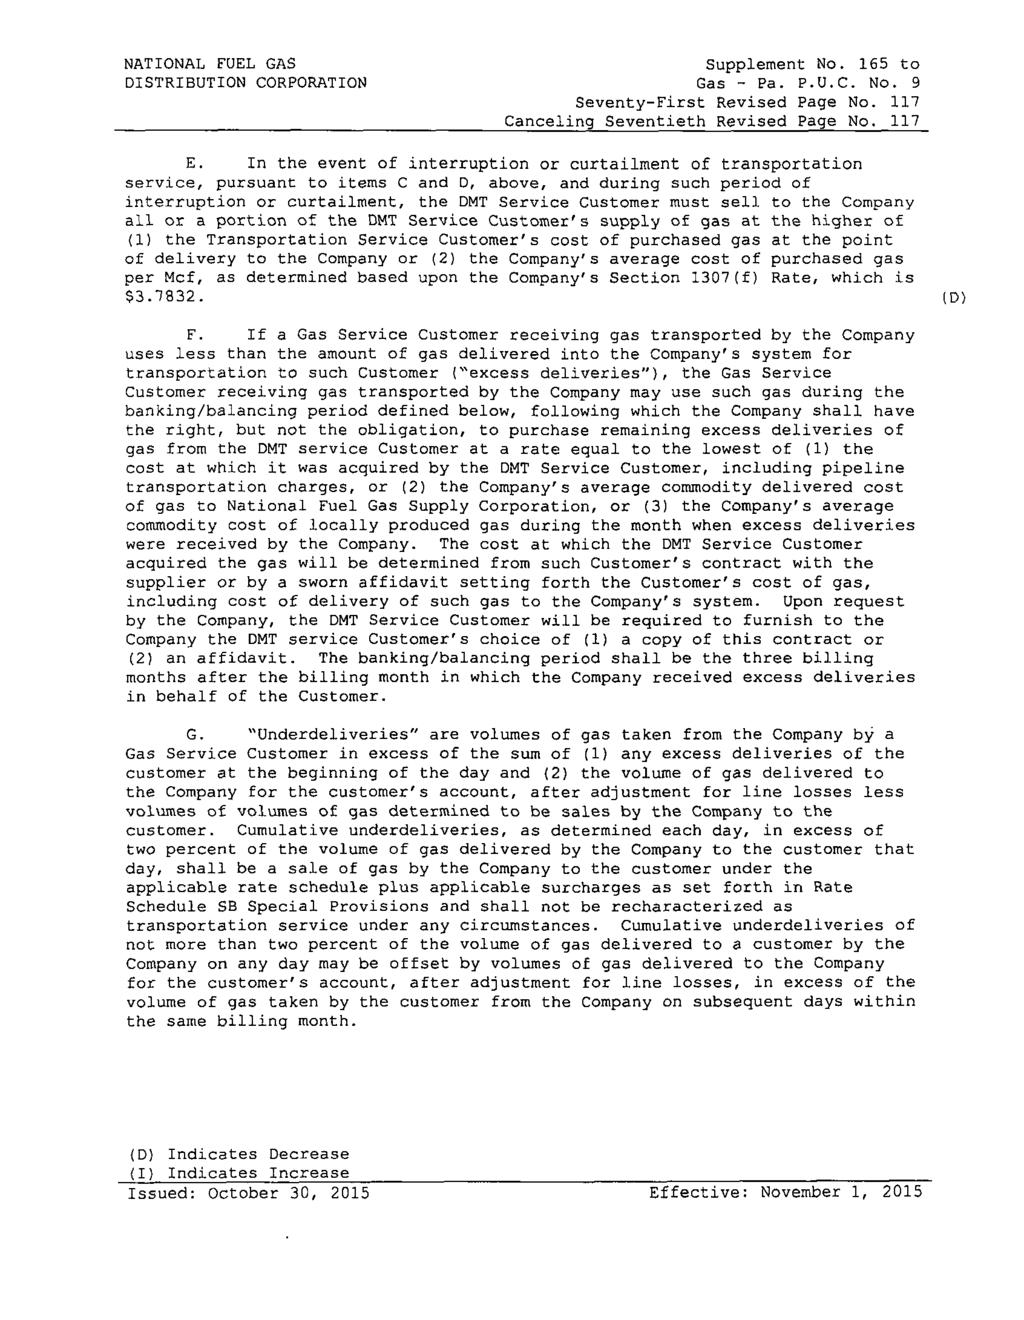 NATIONAL FUEL GAS DISTRIBUTION CORPORATION Supplement N. 165 t Gas - Pa. P.U.C. N. 9 Seventy-First Revised Page N. 117 Canceling Seventieth Revised Page N. 117 E.